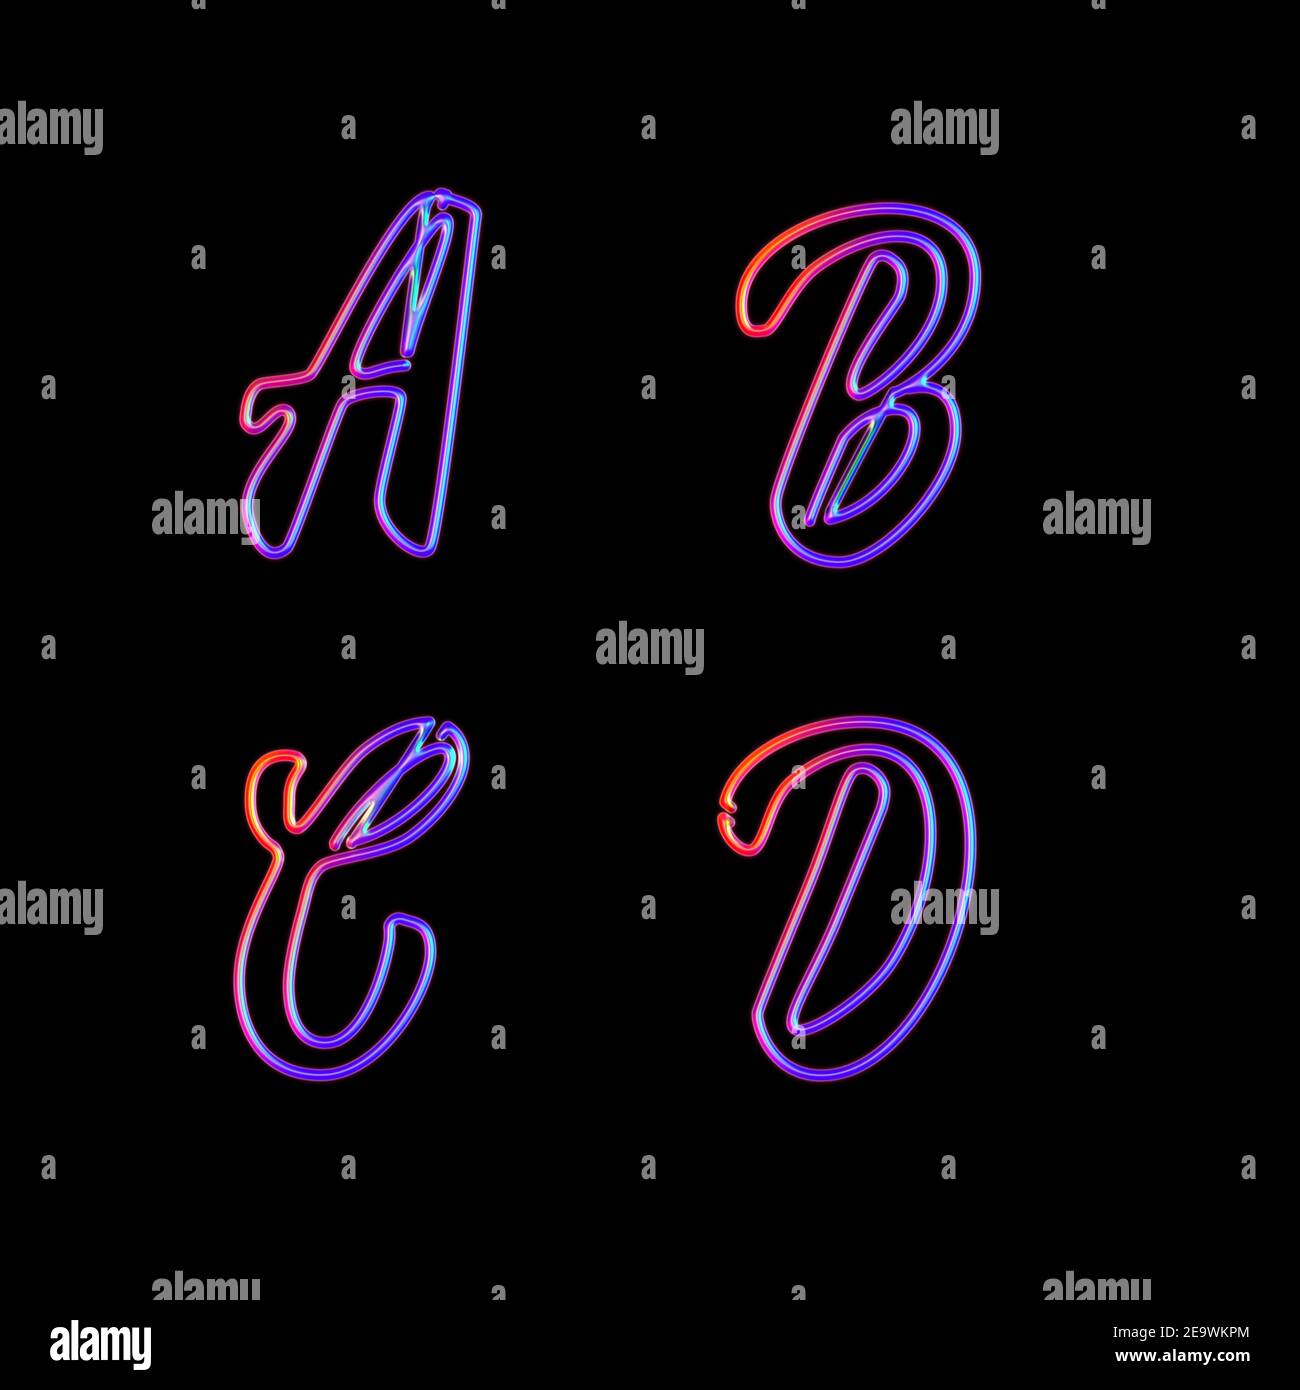 3D rendering of glowing neon capital letters - letters A-D Stock Photo